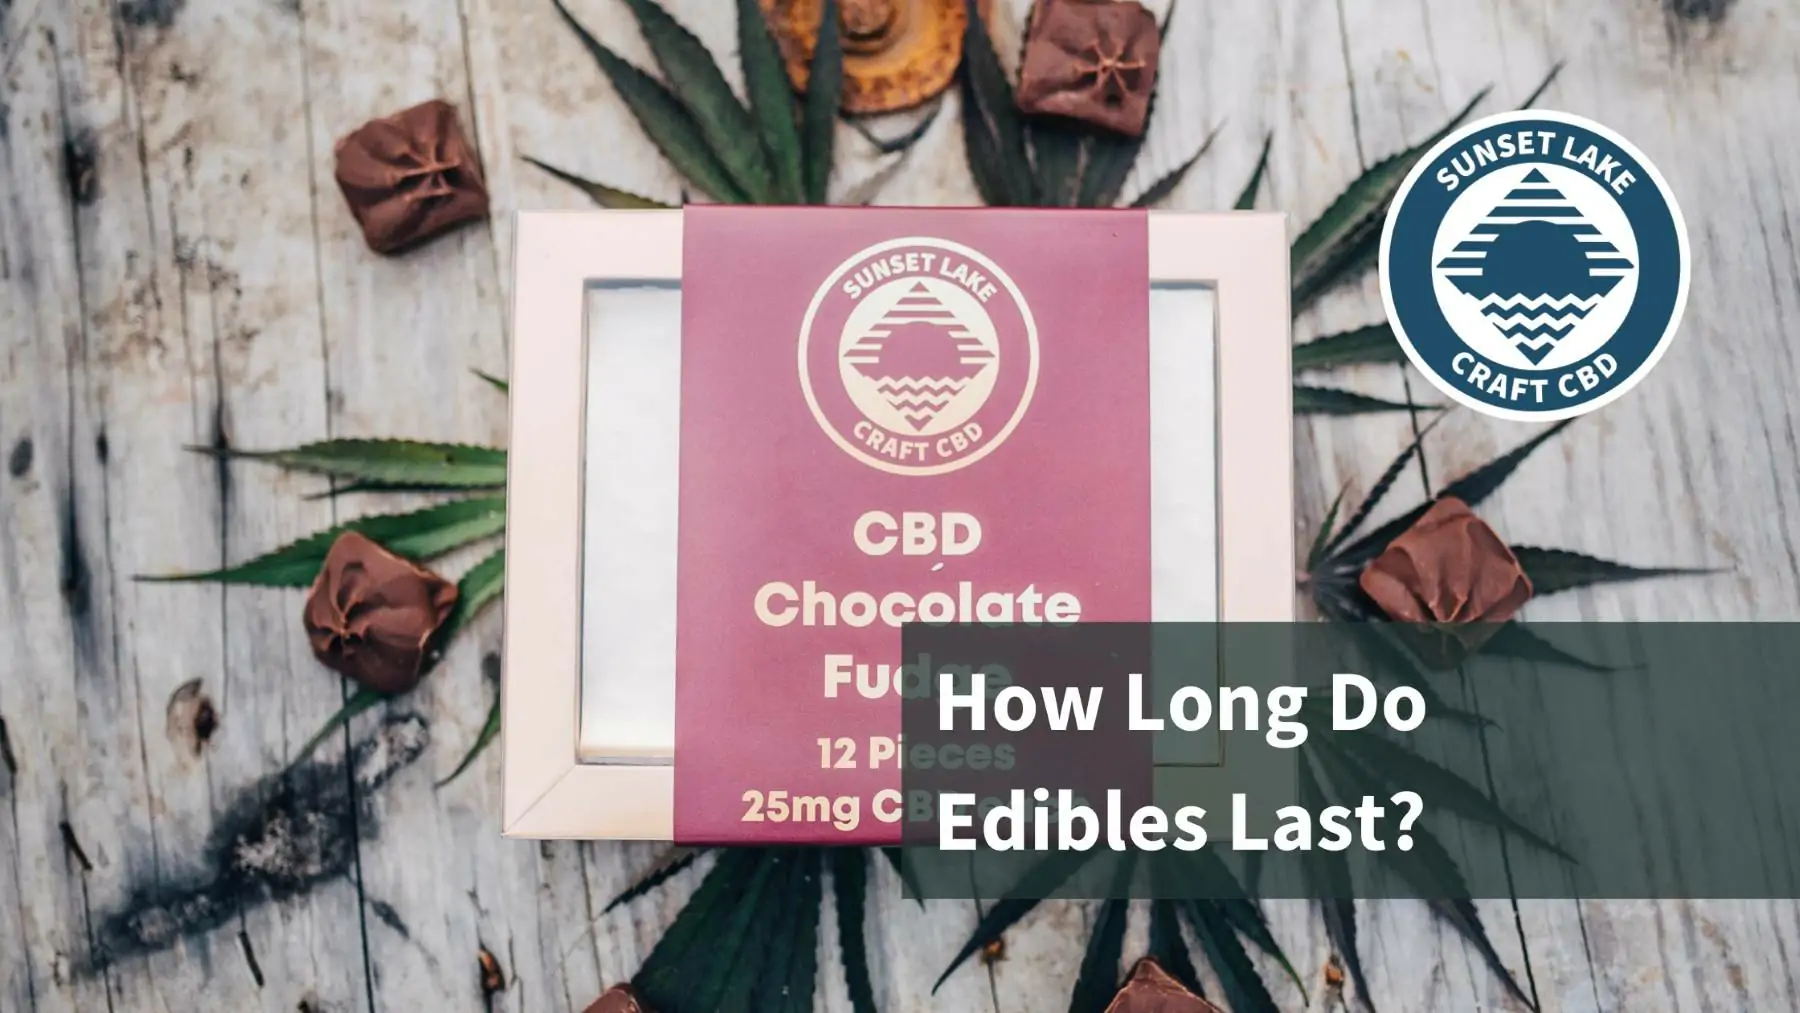 A box of edible CBD fudge with text that reads "How long do edibles last?"